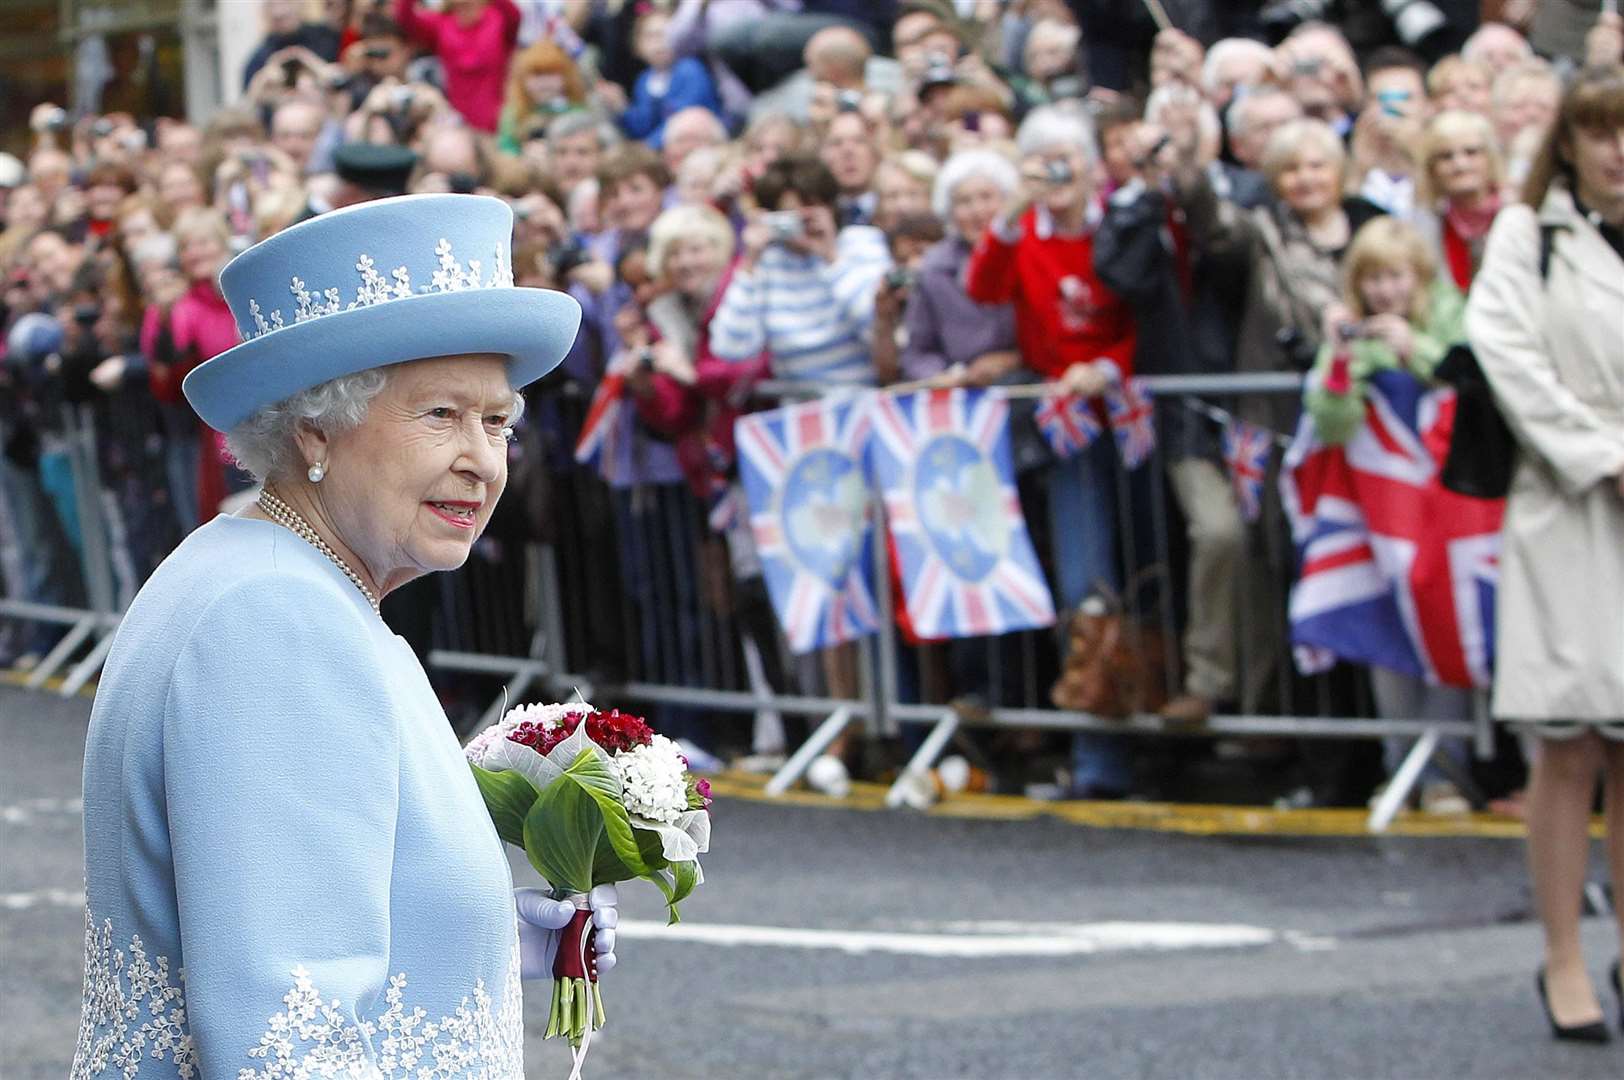 The Queen visited Enniskillen in Co Fermanagh in 2012 as part of her Diamond Jubilee tour (PA)